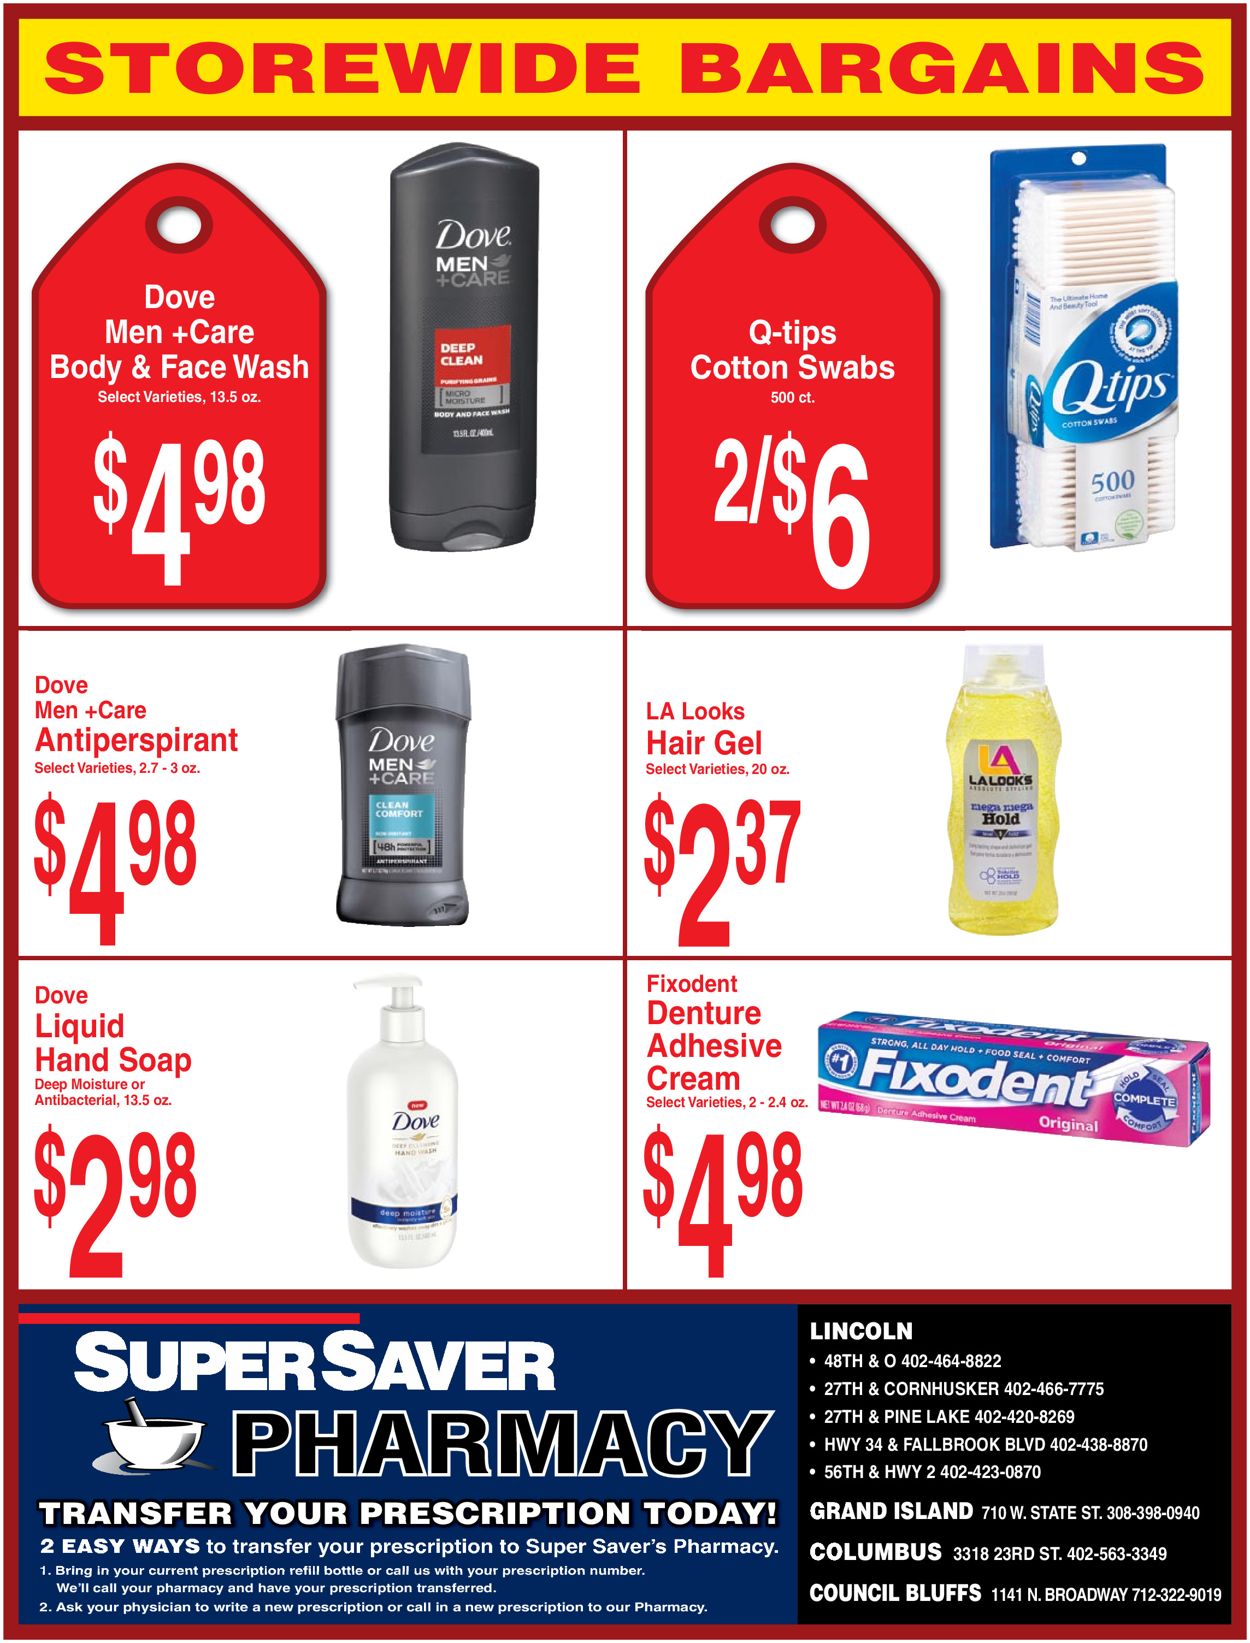 Super Saver Ad from 06/16/2021